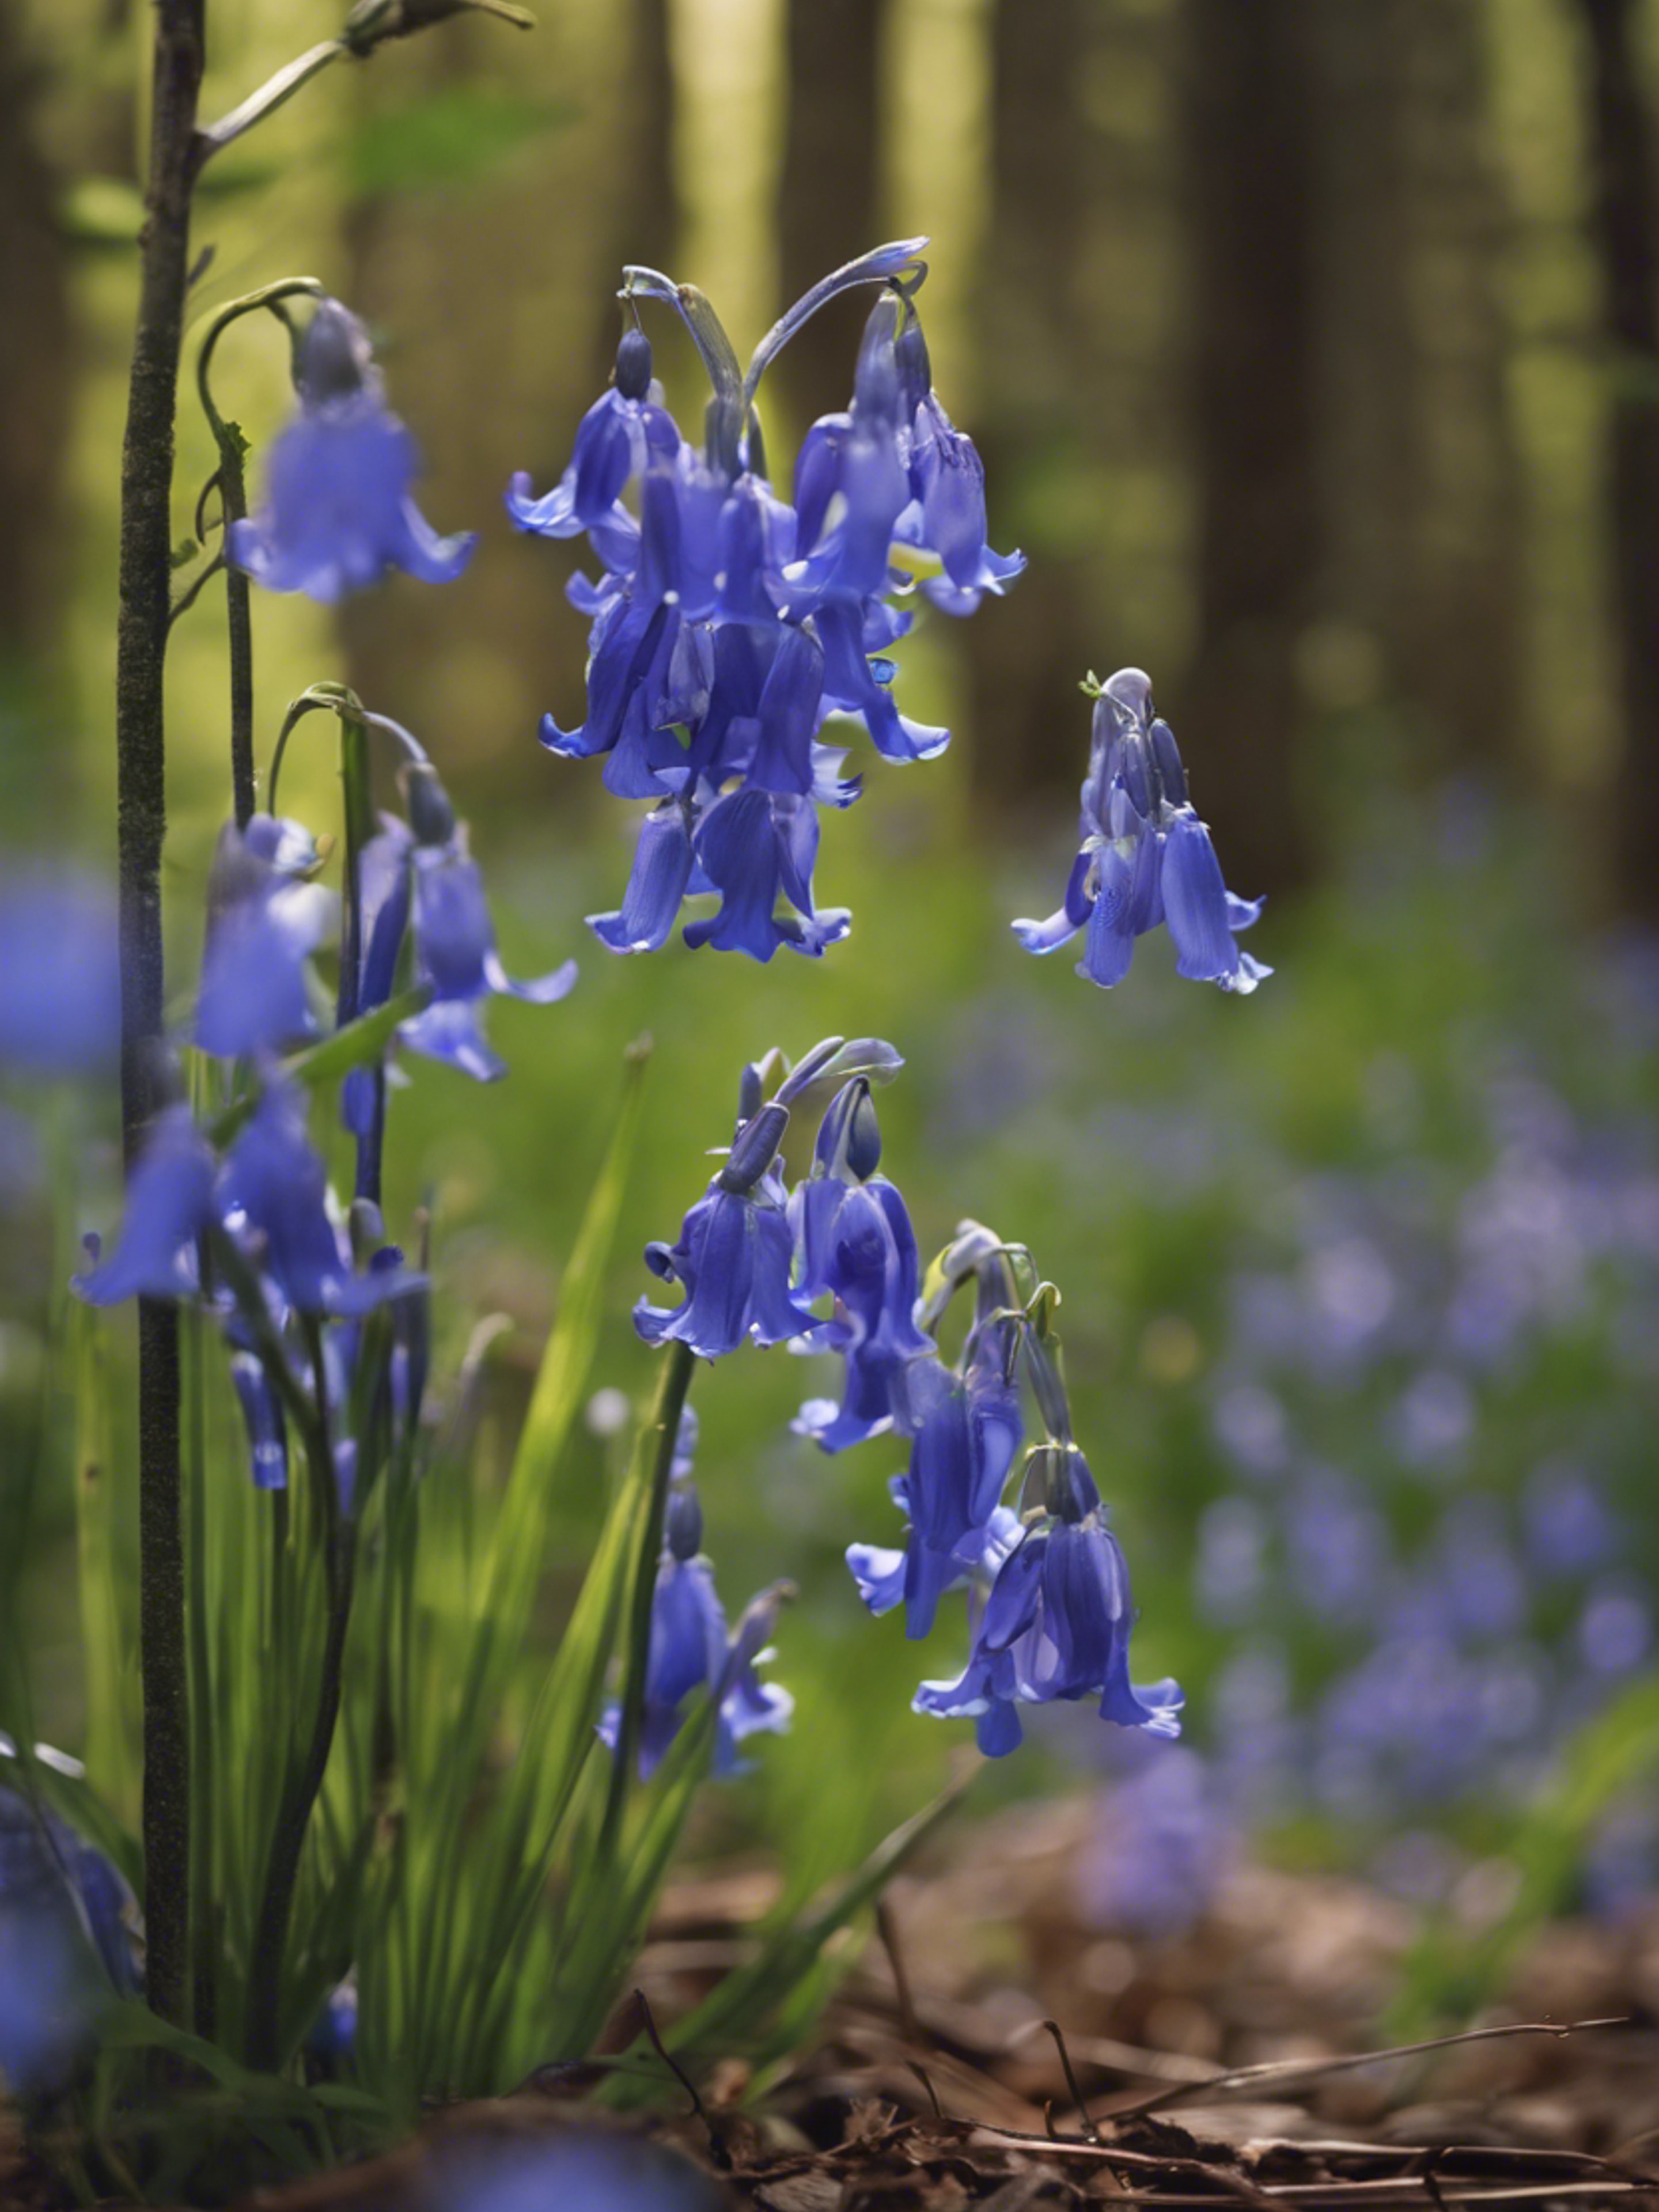 A cluster of bluebells growing in the heart of a dense, untouched forest.壁紙[e9ac2ad9f62f40e2a0af]